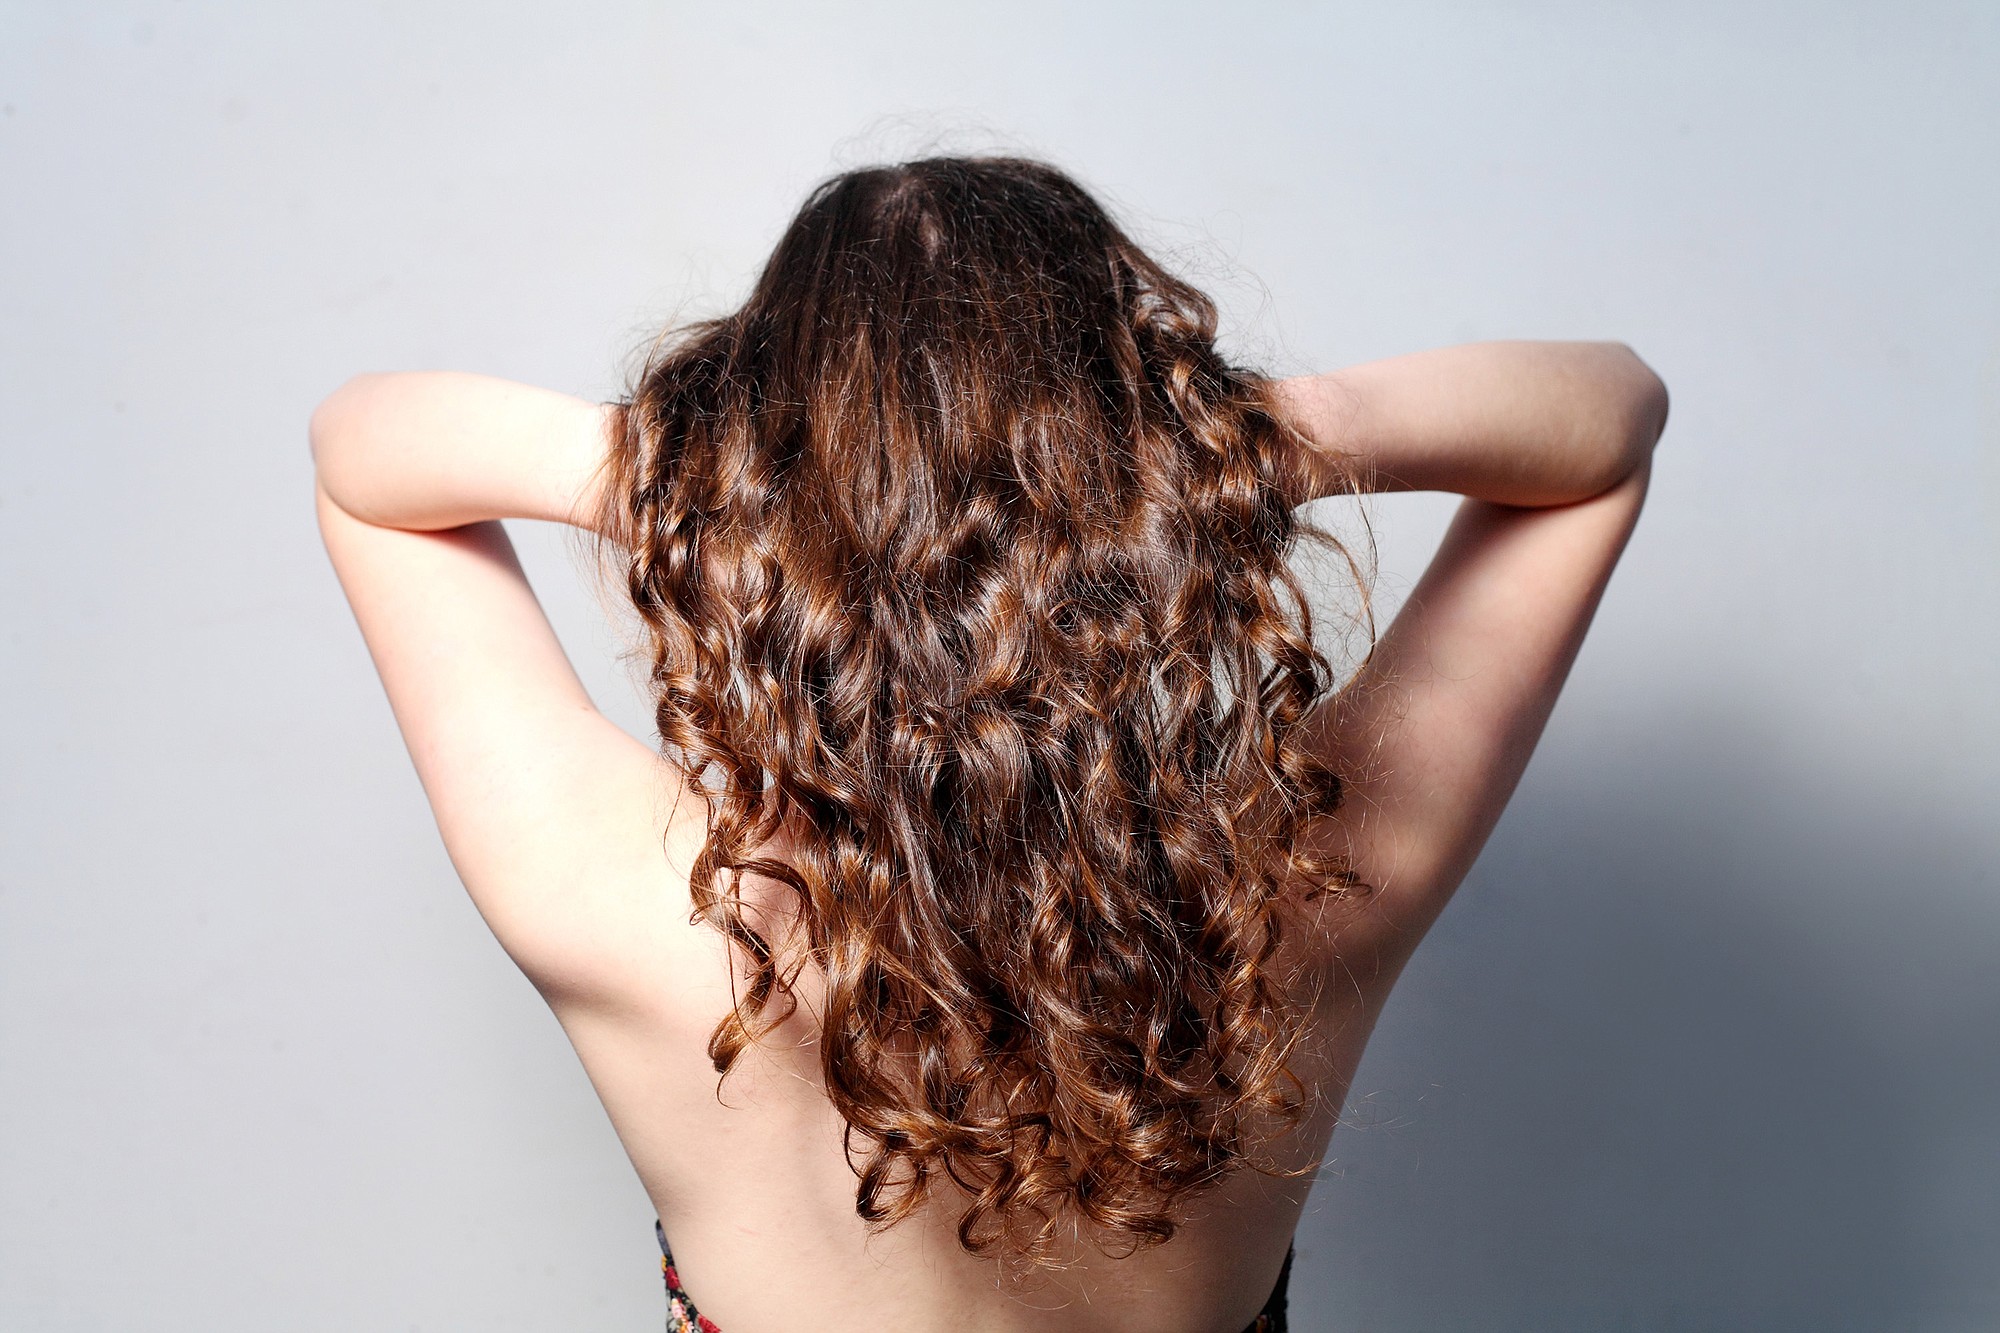 Salons that cater to curly-haired women are on the rise as the naturally curly look is inspiring increased treatment.